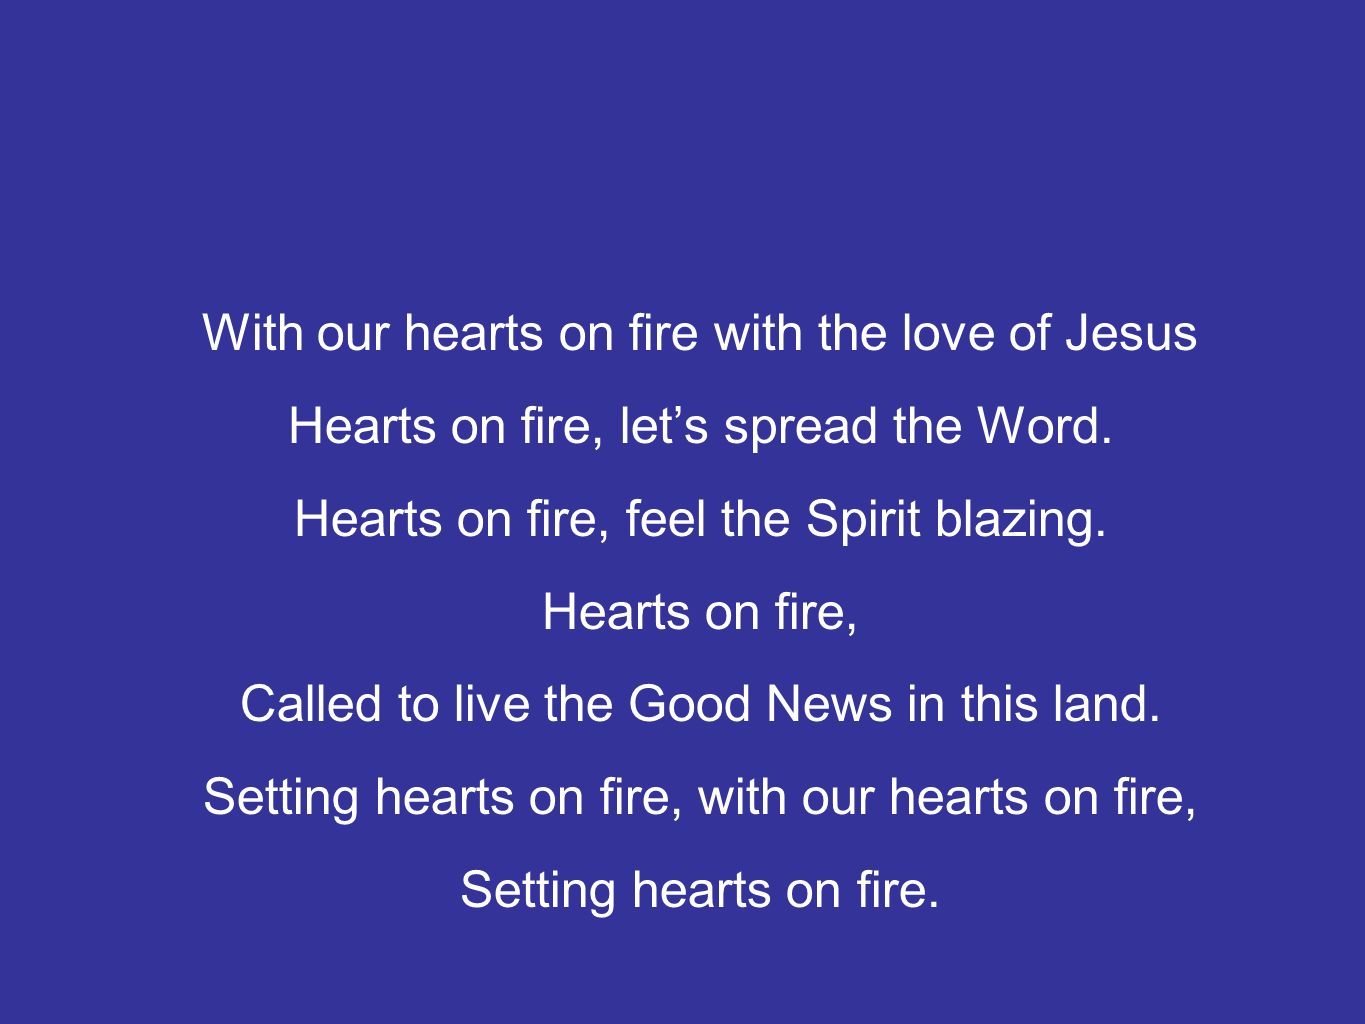 With our hearts on fire with the love of Jesus Hearts on fire, let’s spread the Word.